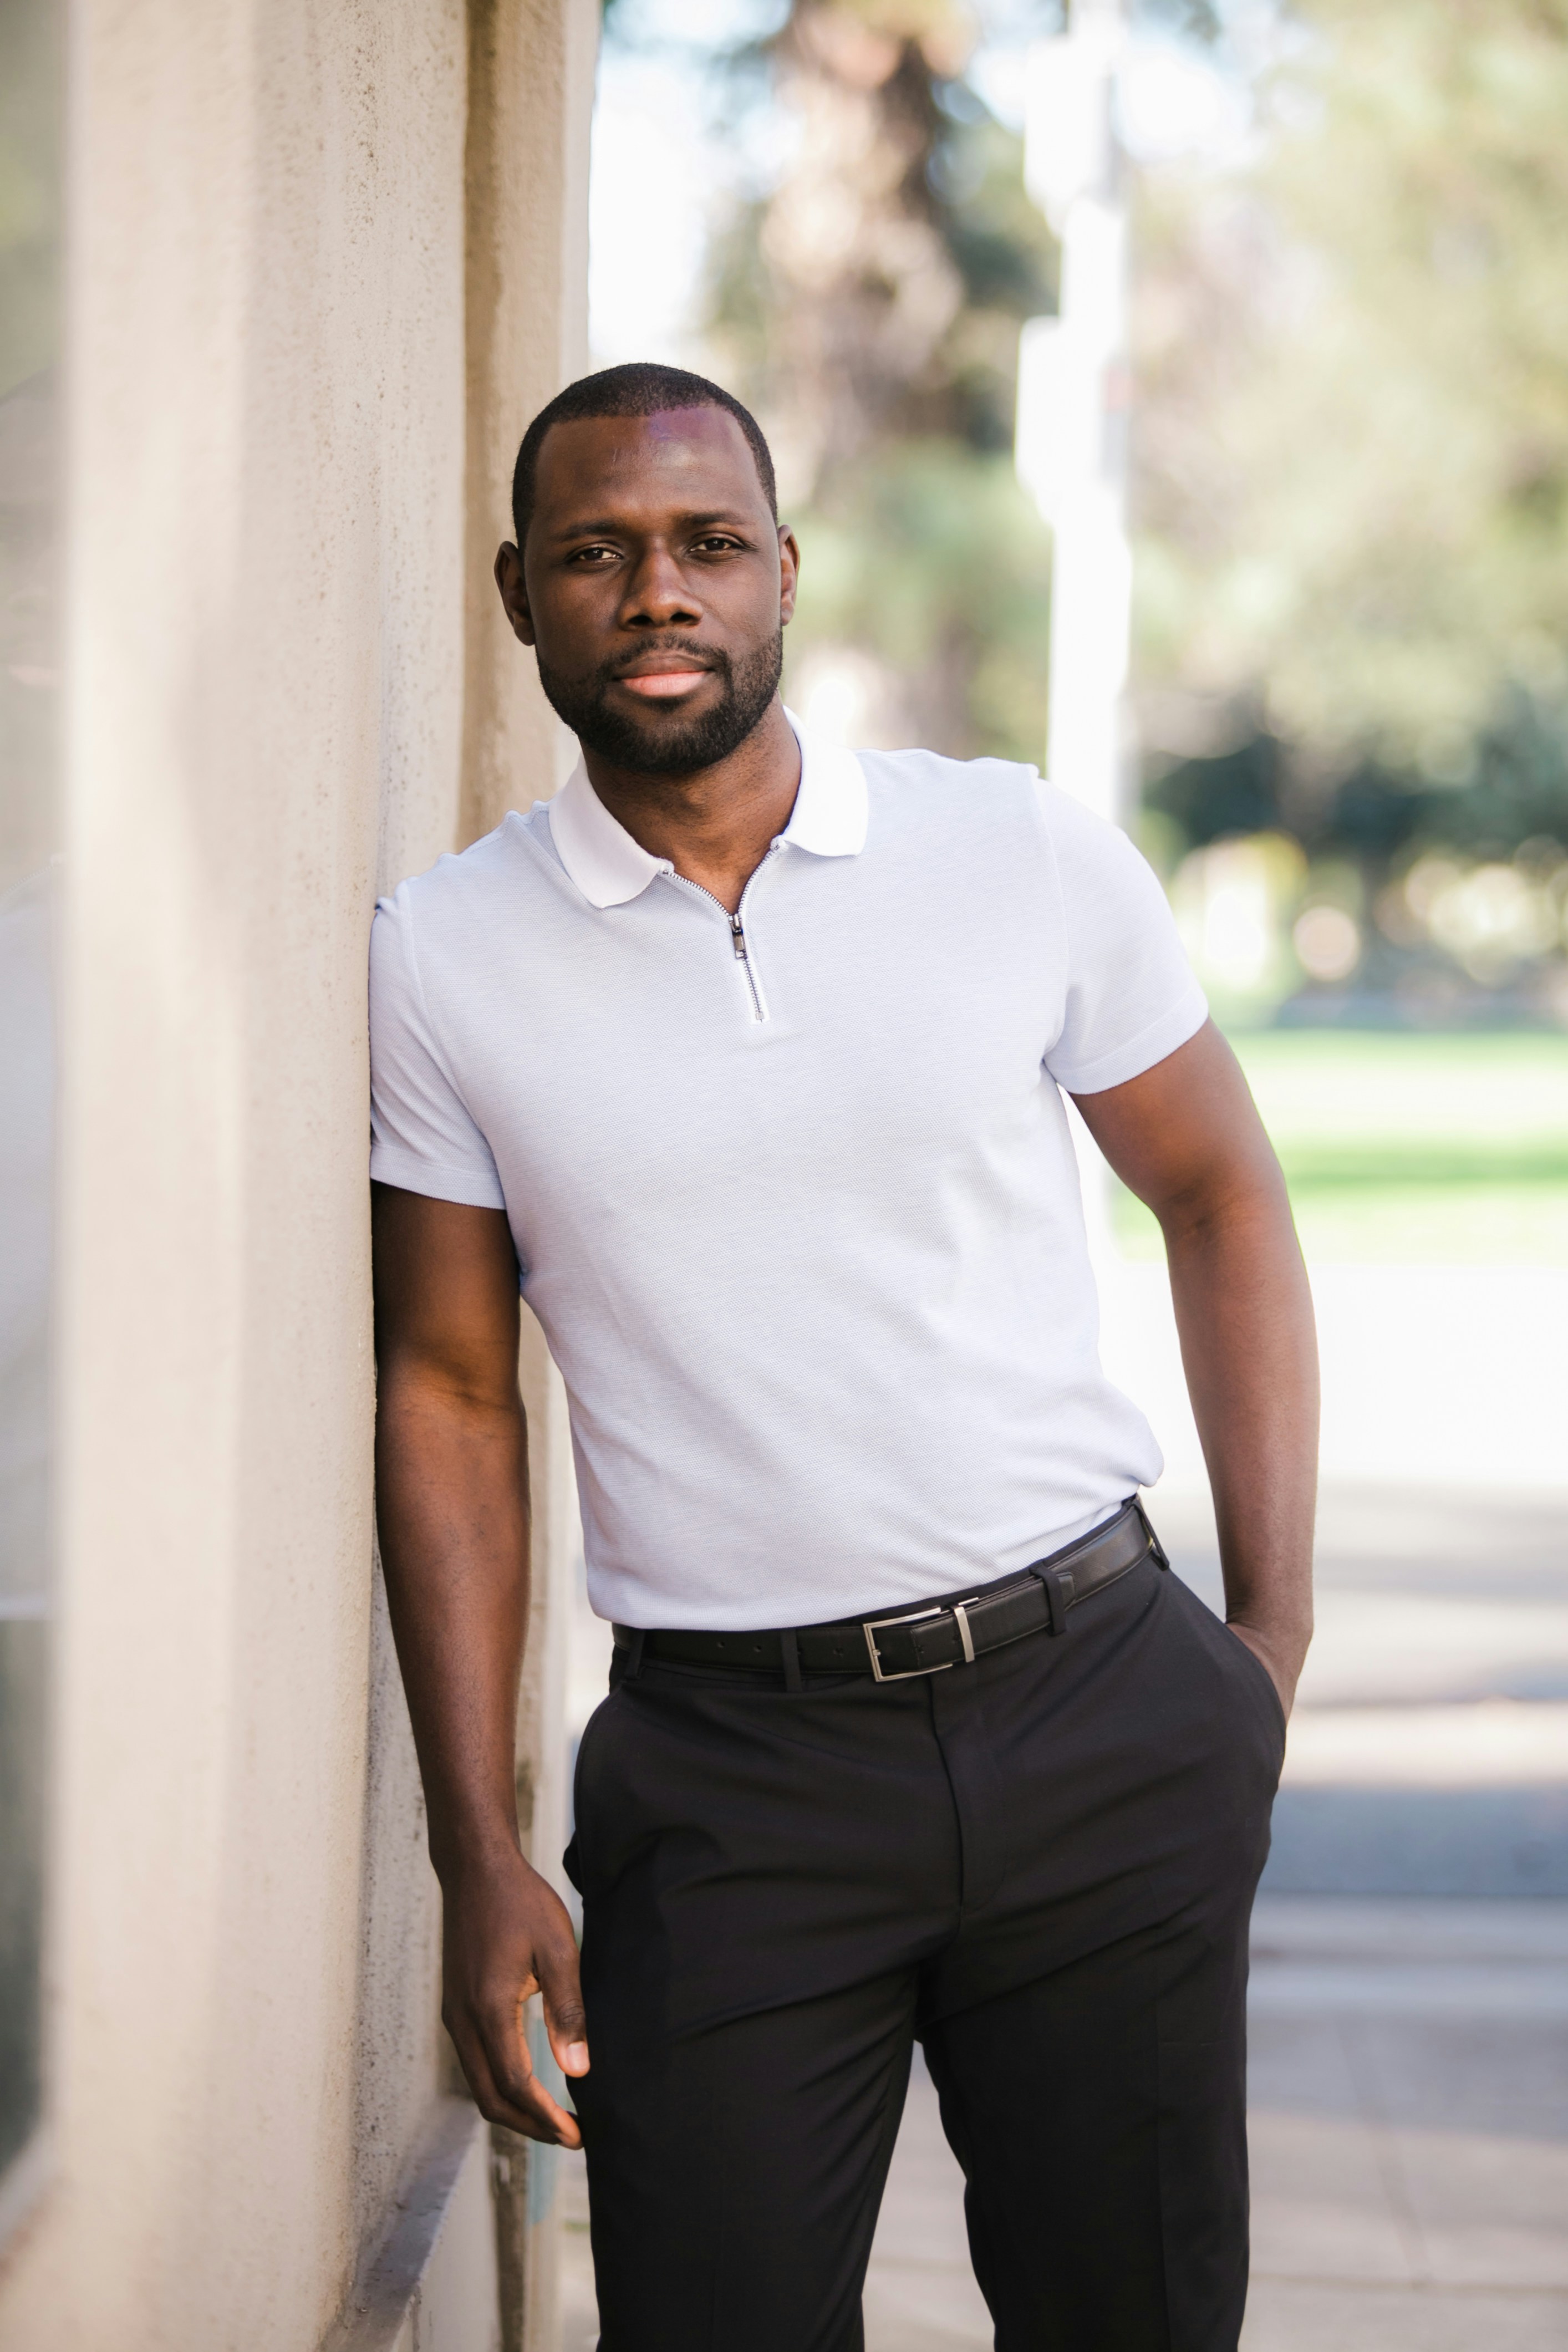 great photo recipe,how to photograph fortune vieyra standing against a wall with a calm expression.; man in white polo shirt and black pants standing beside white wall during daytime